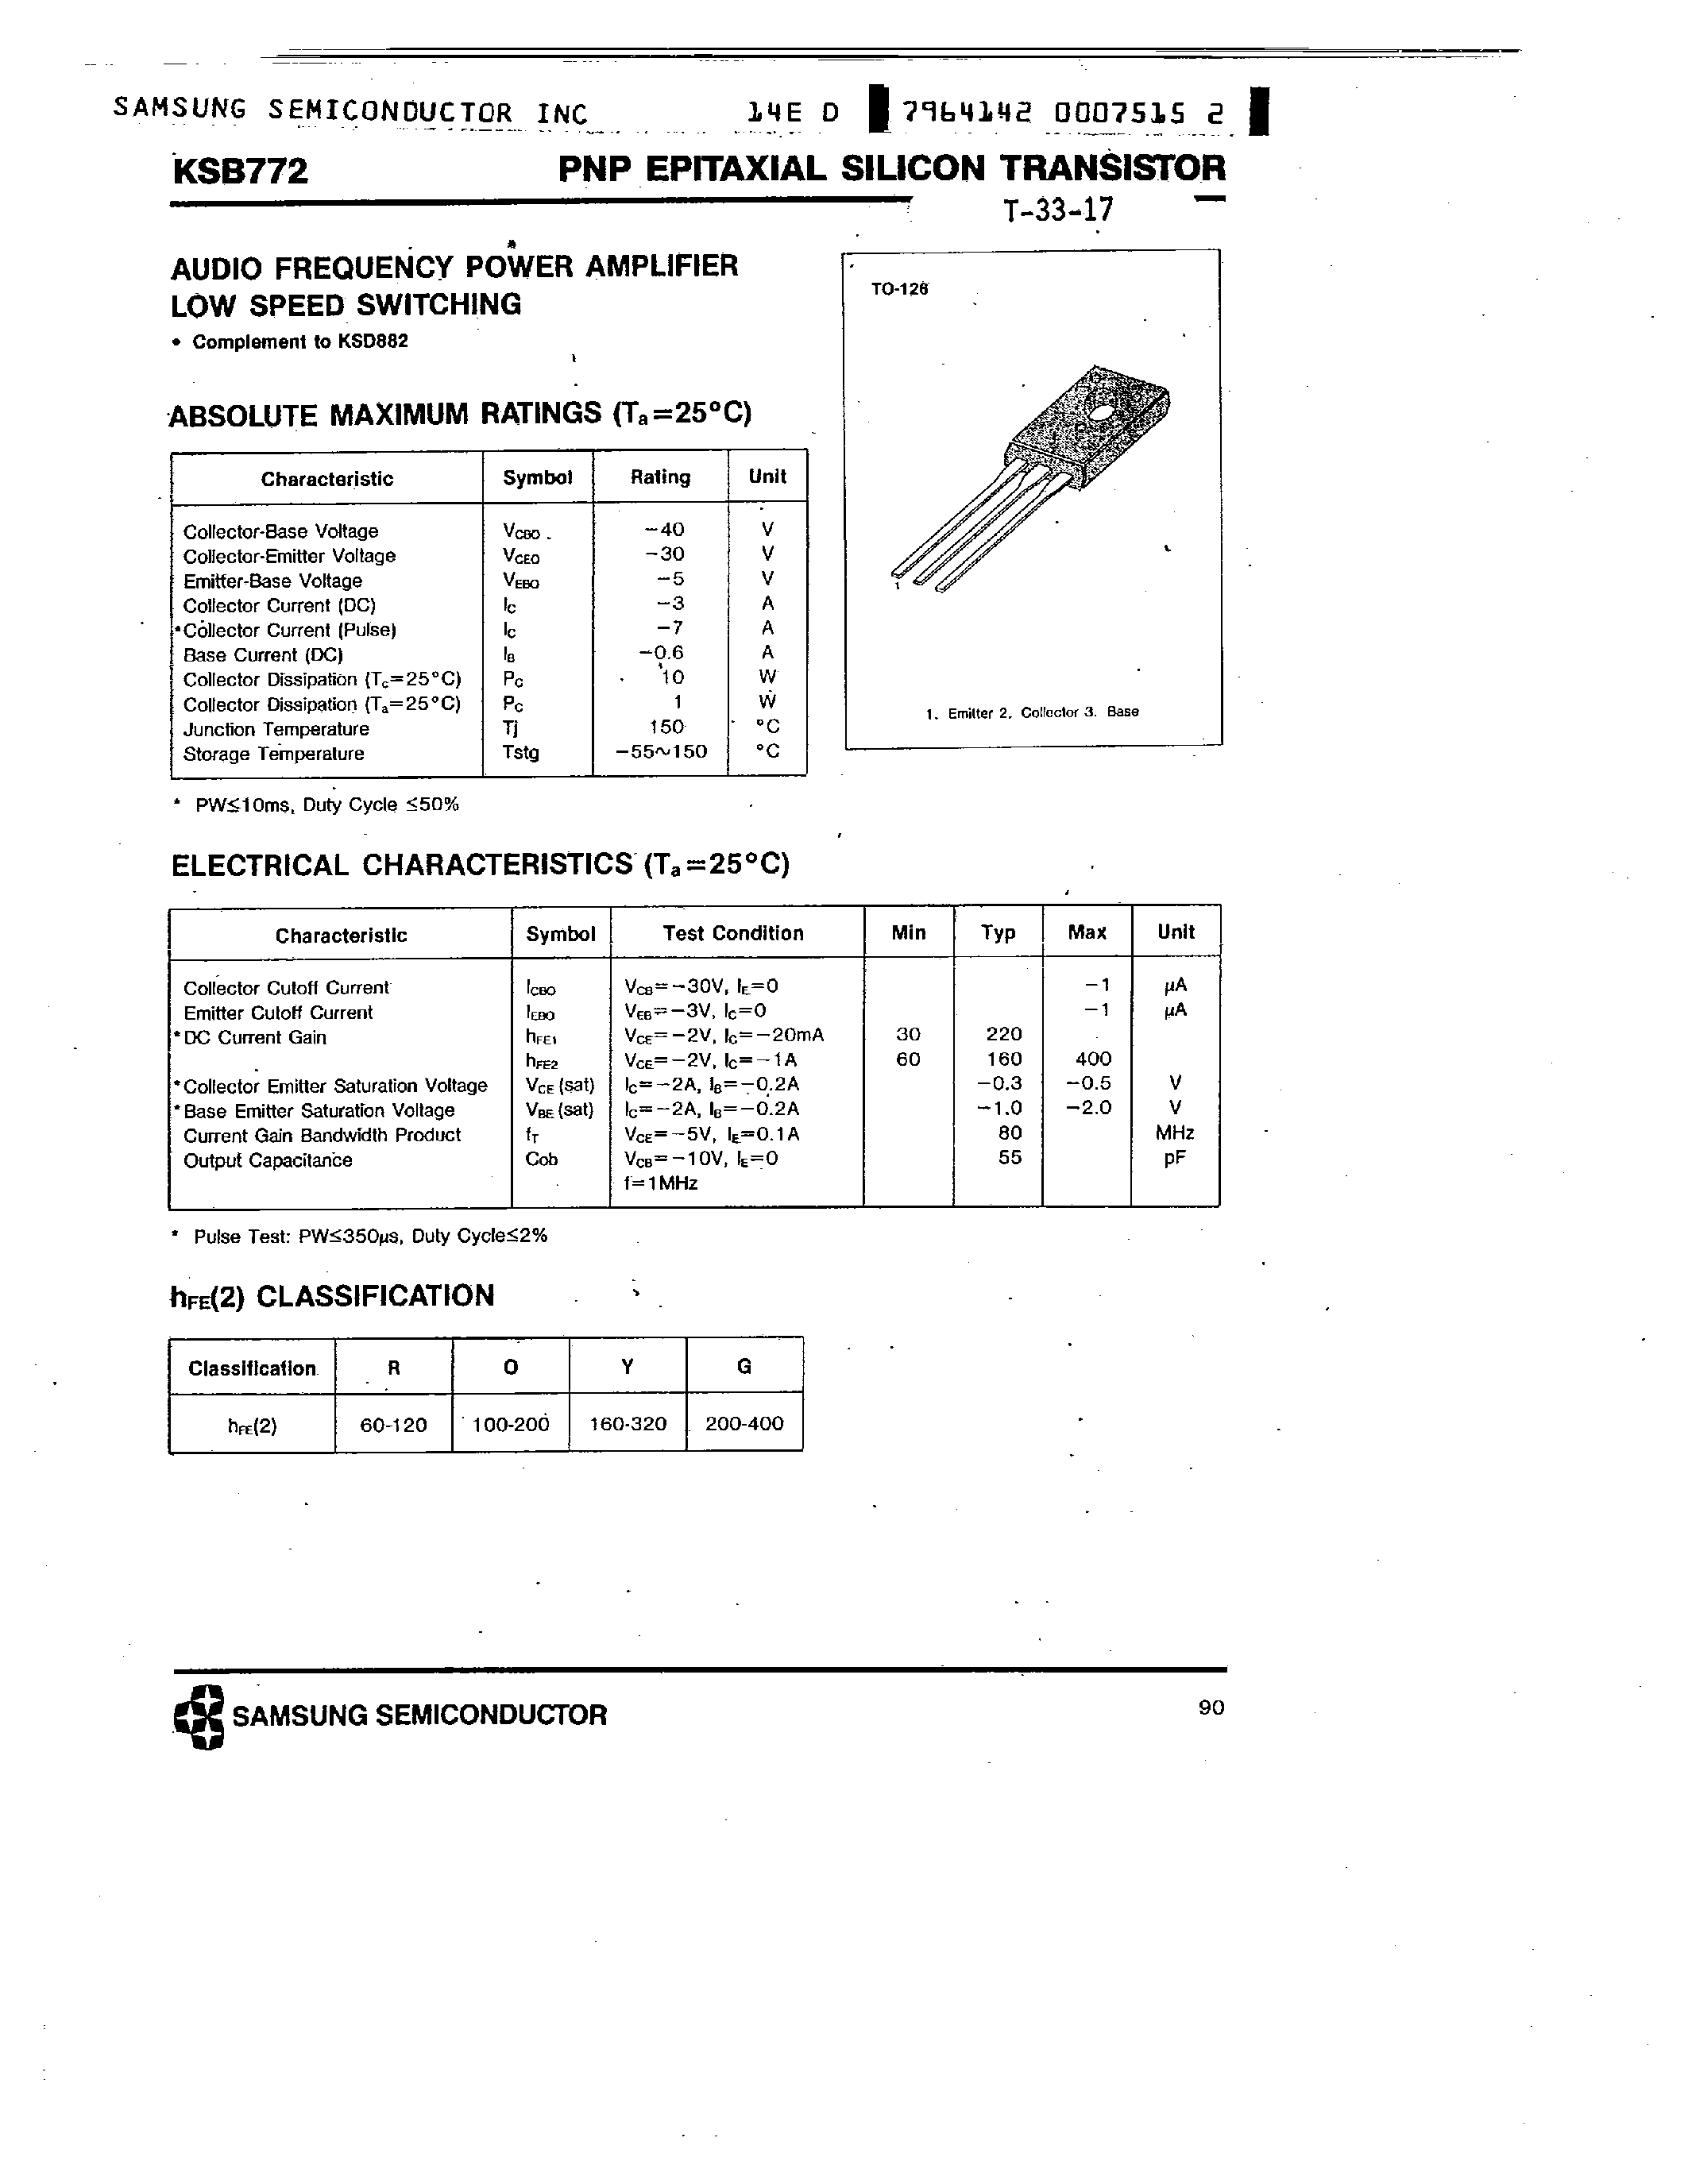 Datasheet KSB772 - PNP (AUDIO FREQUENCY POWER AMPLIFIER LOW SPEED SWITCHING) page 1